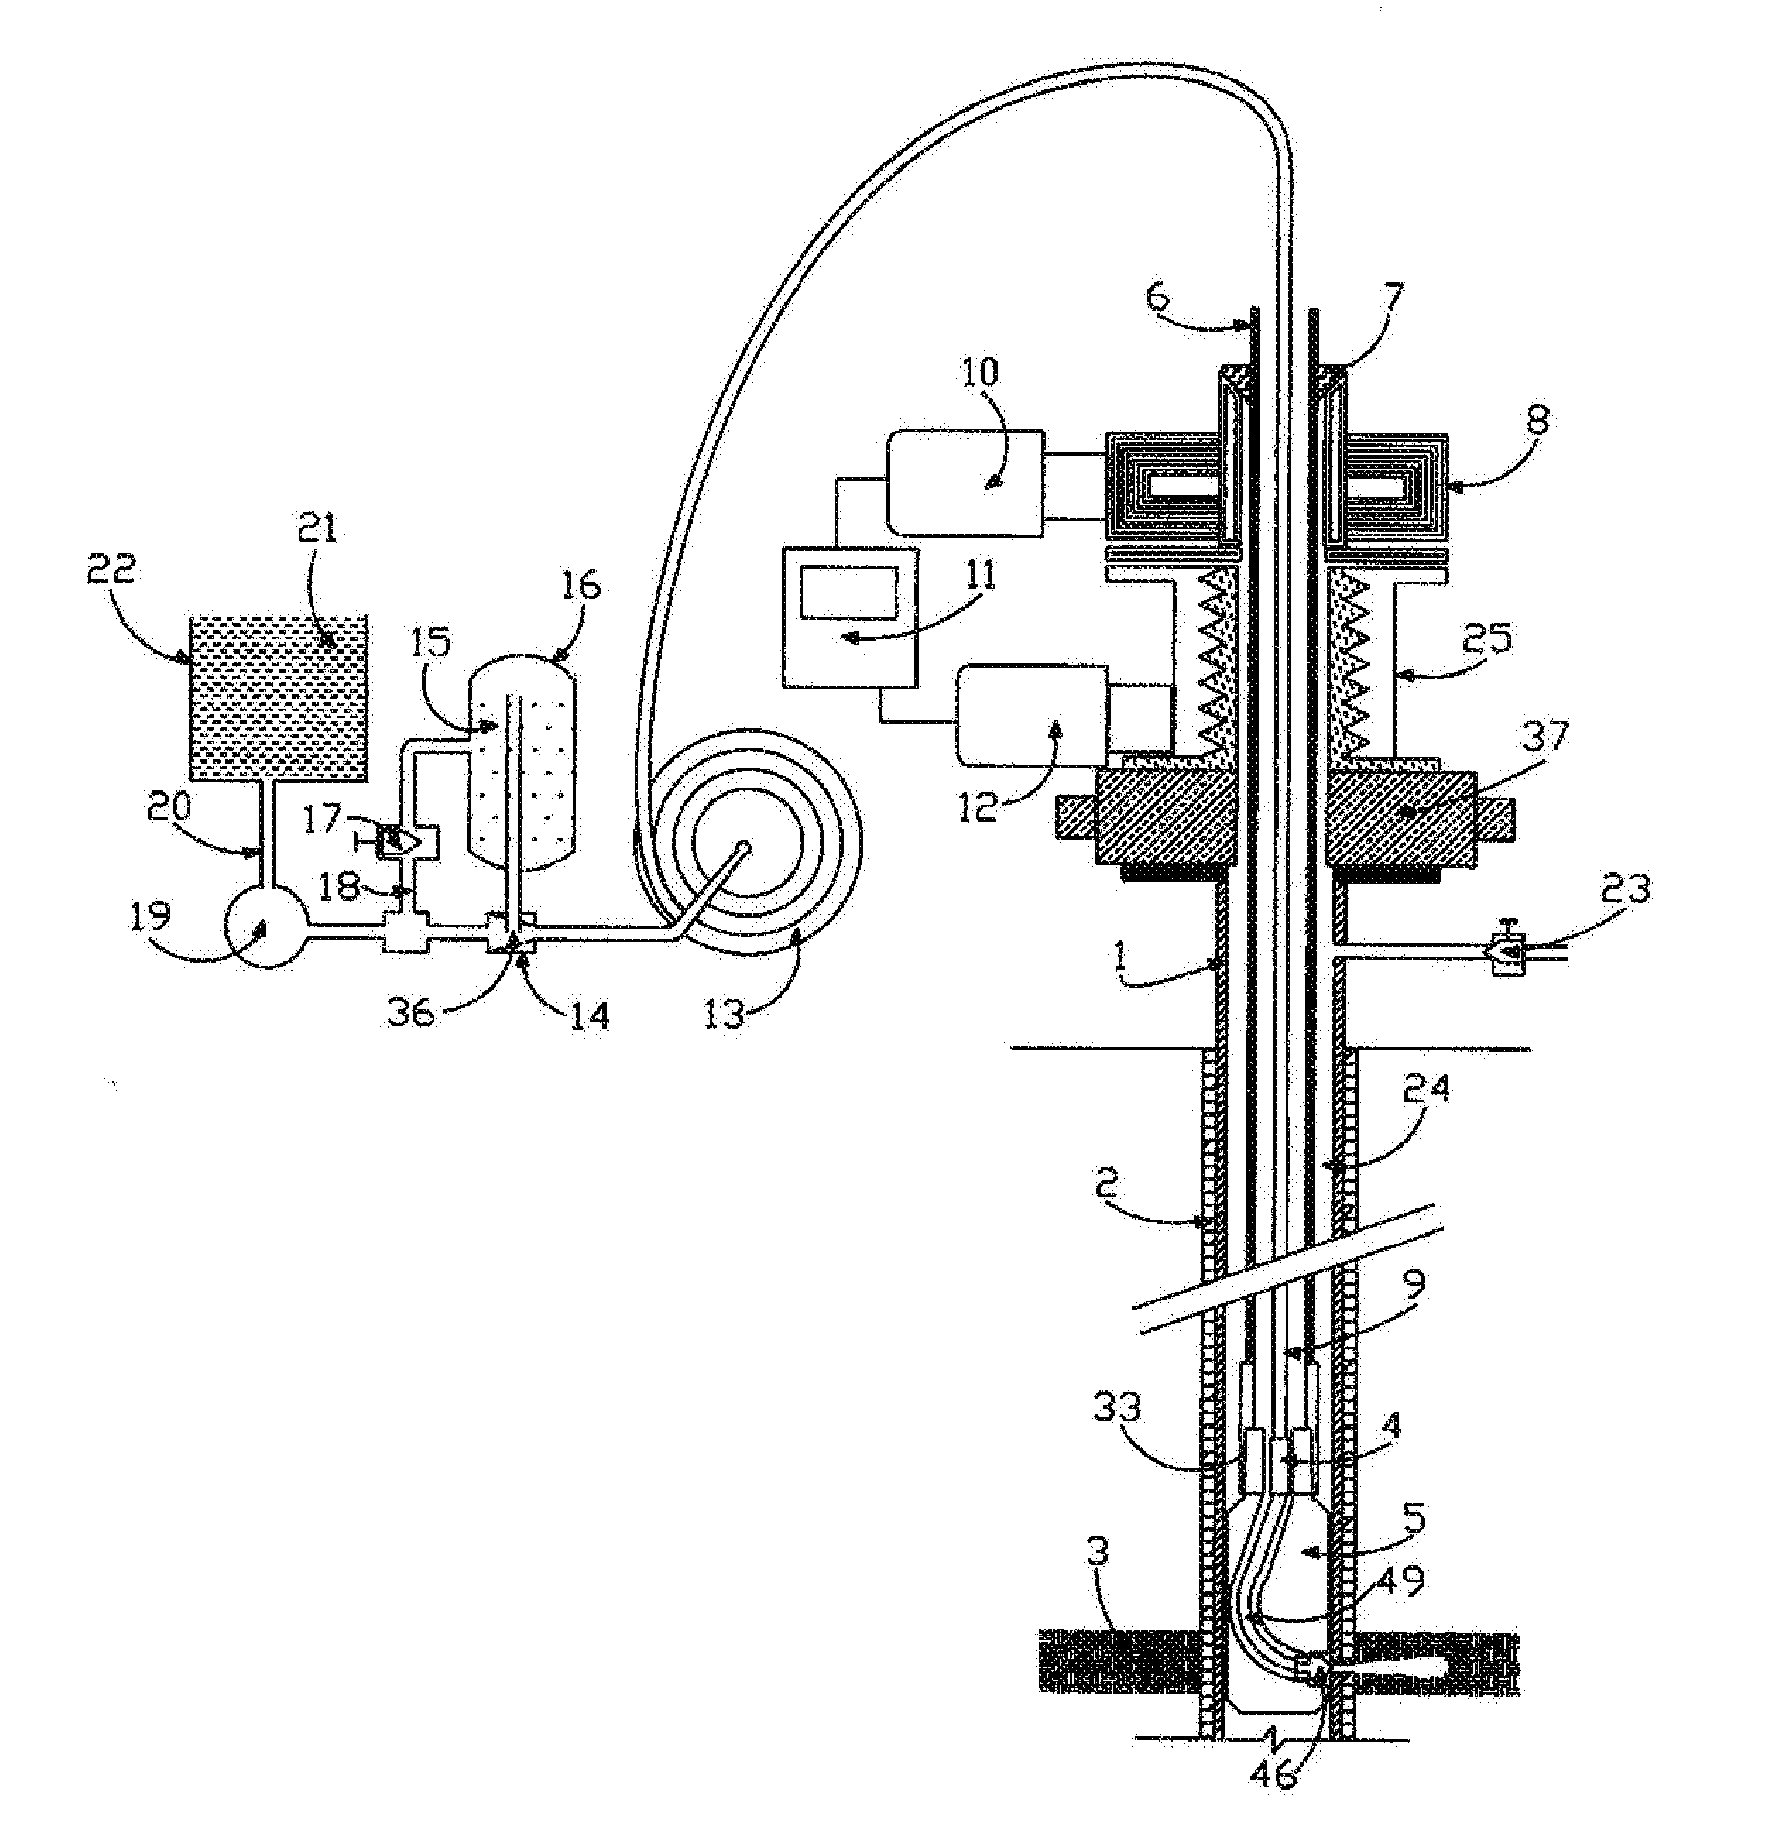 System, apparatus and method for abrasive jet fluid cutting